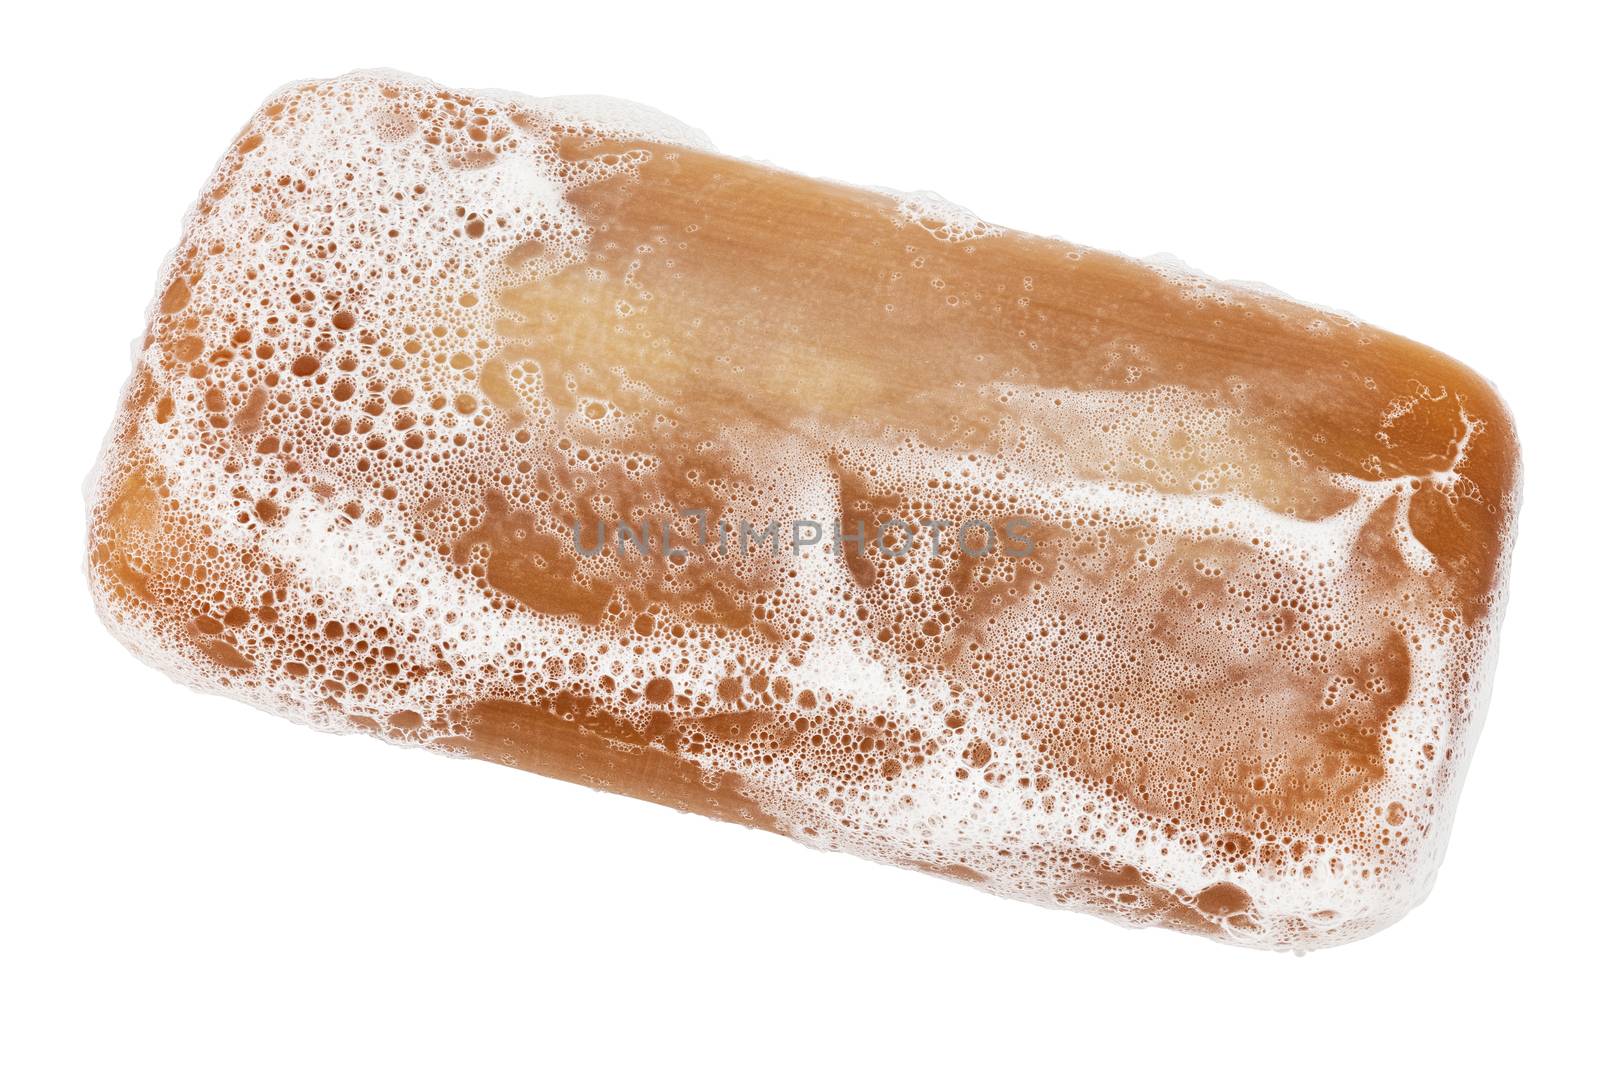 wet piece of brown tar soap with sud foam isolated on white background in diagonal perspective view